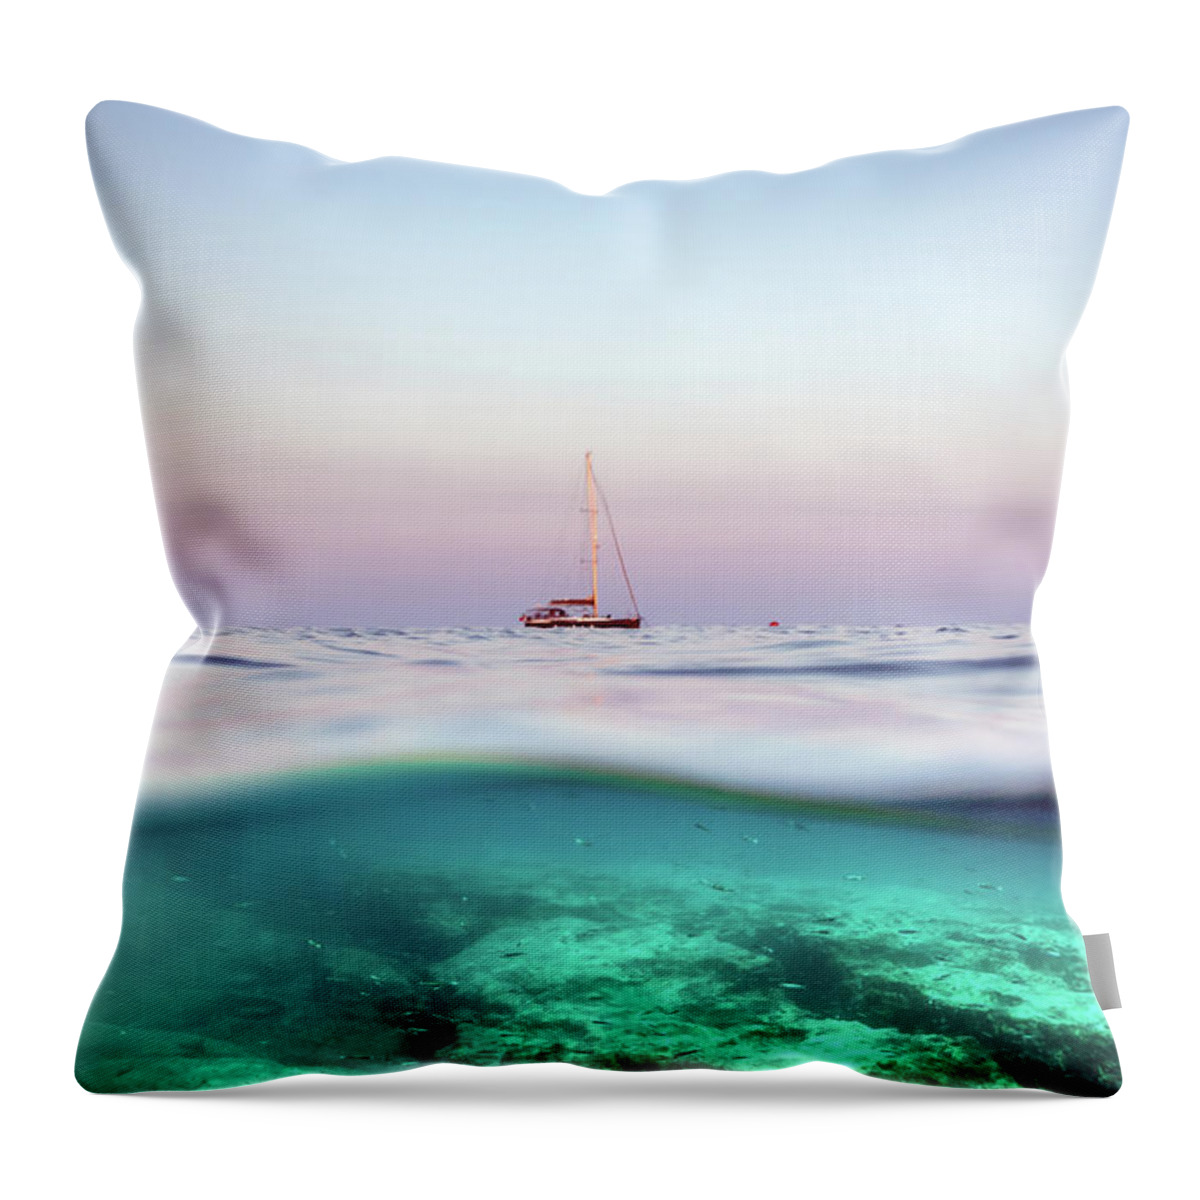 Ocean Throw Pillow featuring the photograph Half And Half by Stelios Kleanthous